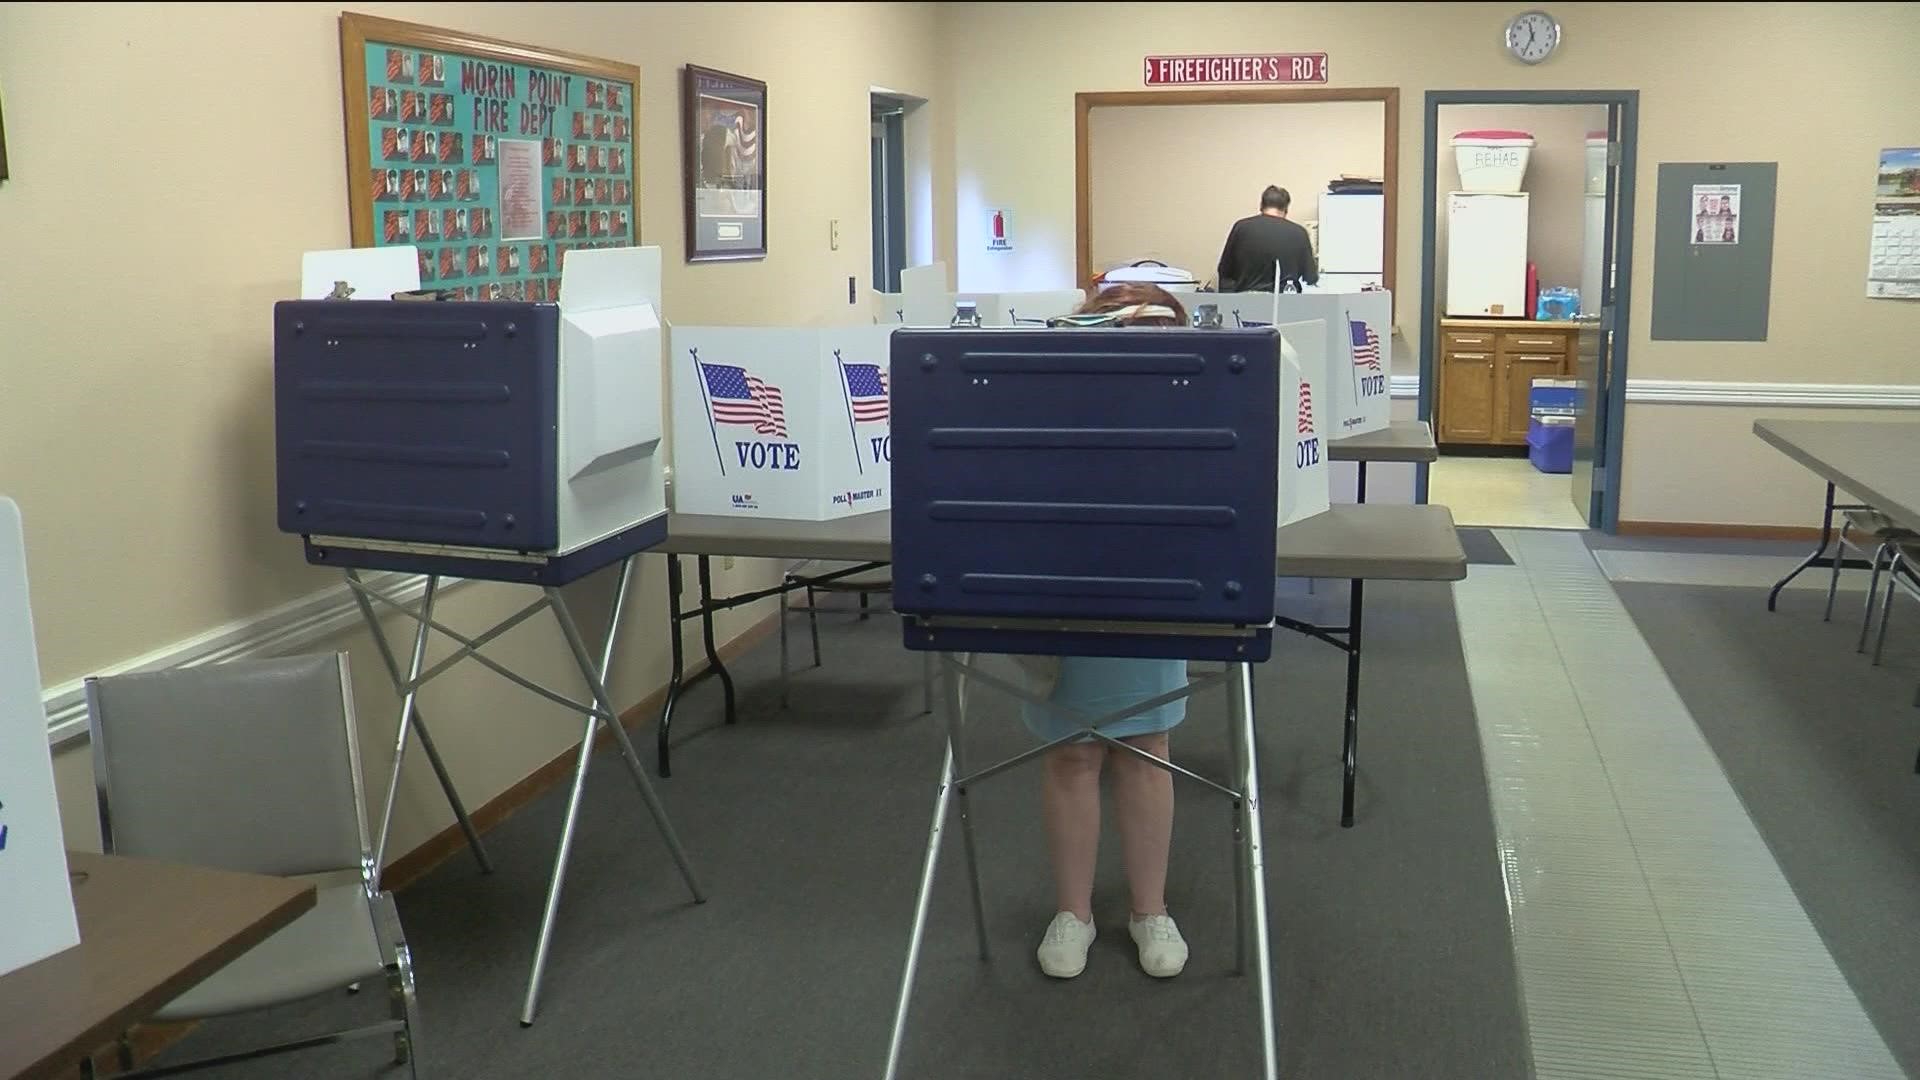 Poll workers said they still saw more voters than they expected.